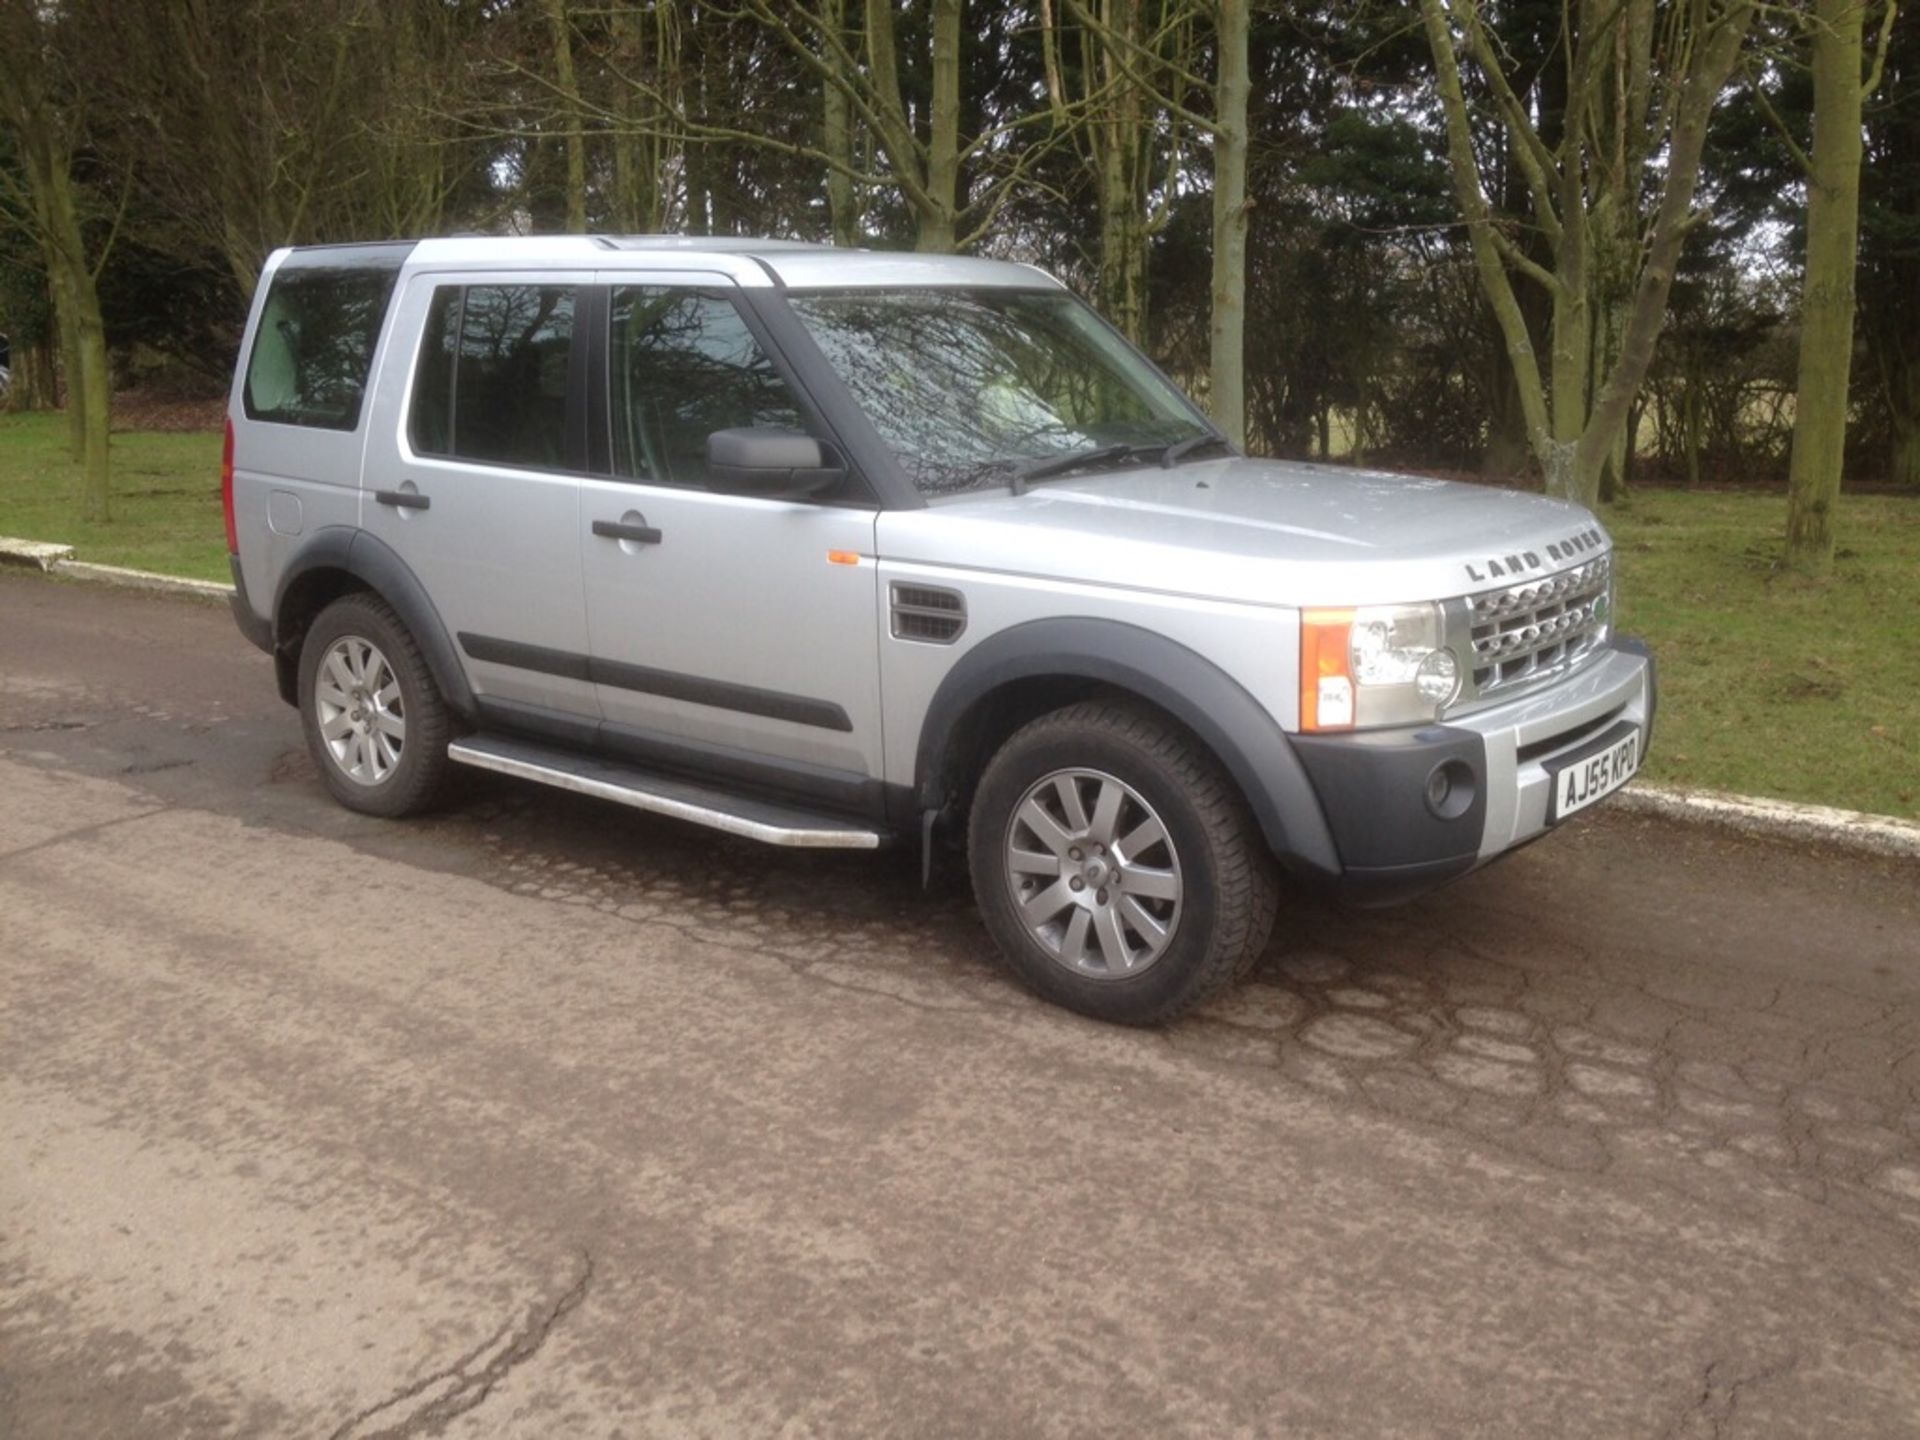 LAND ROVER DISCOVERY 4x4 2005 55 REG - Image 8 of 8